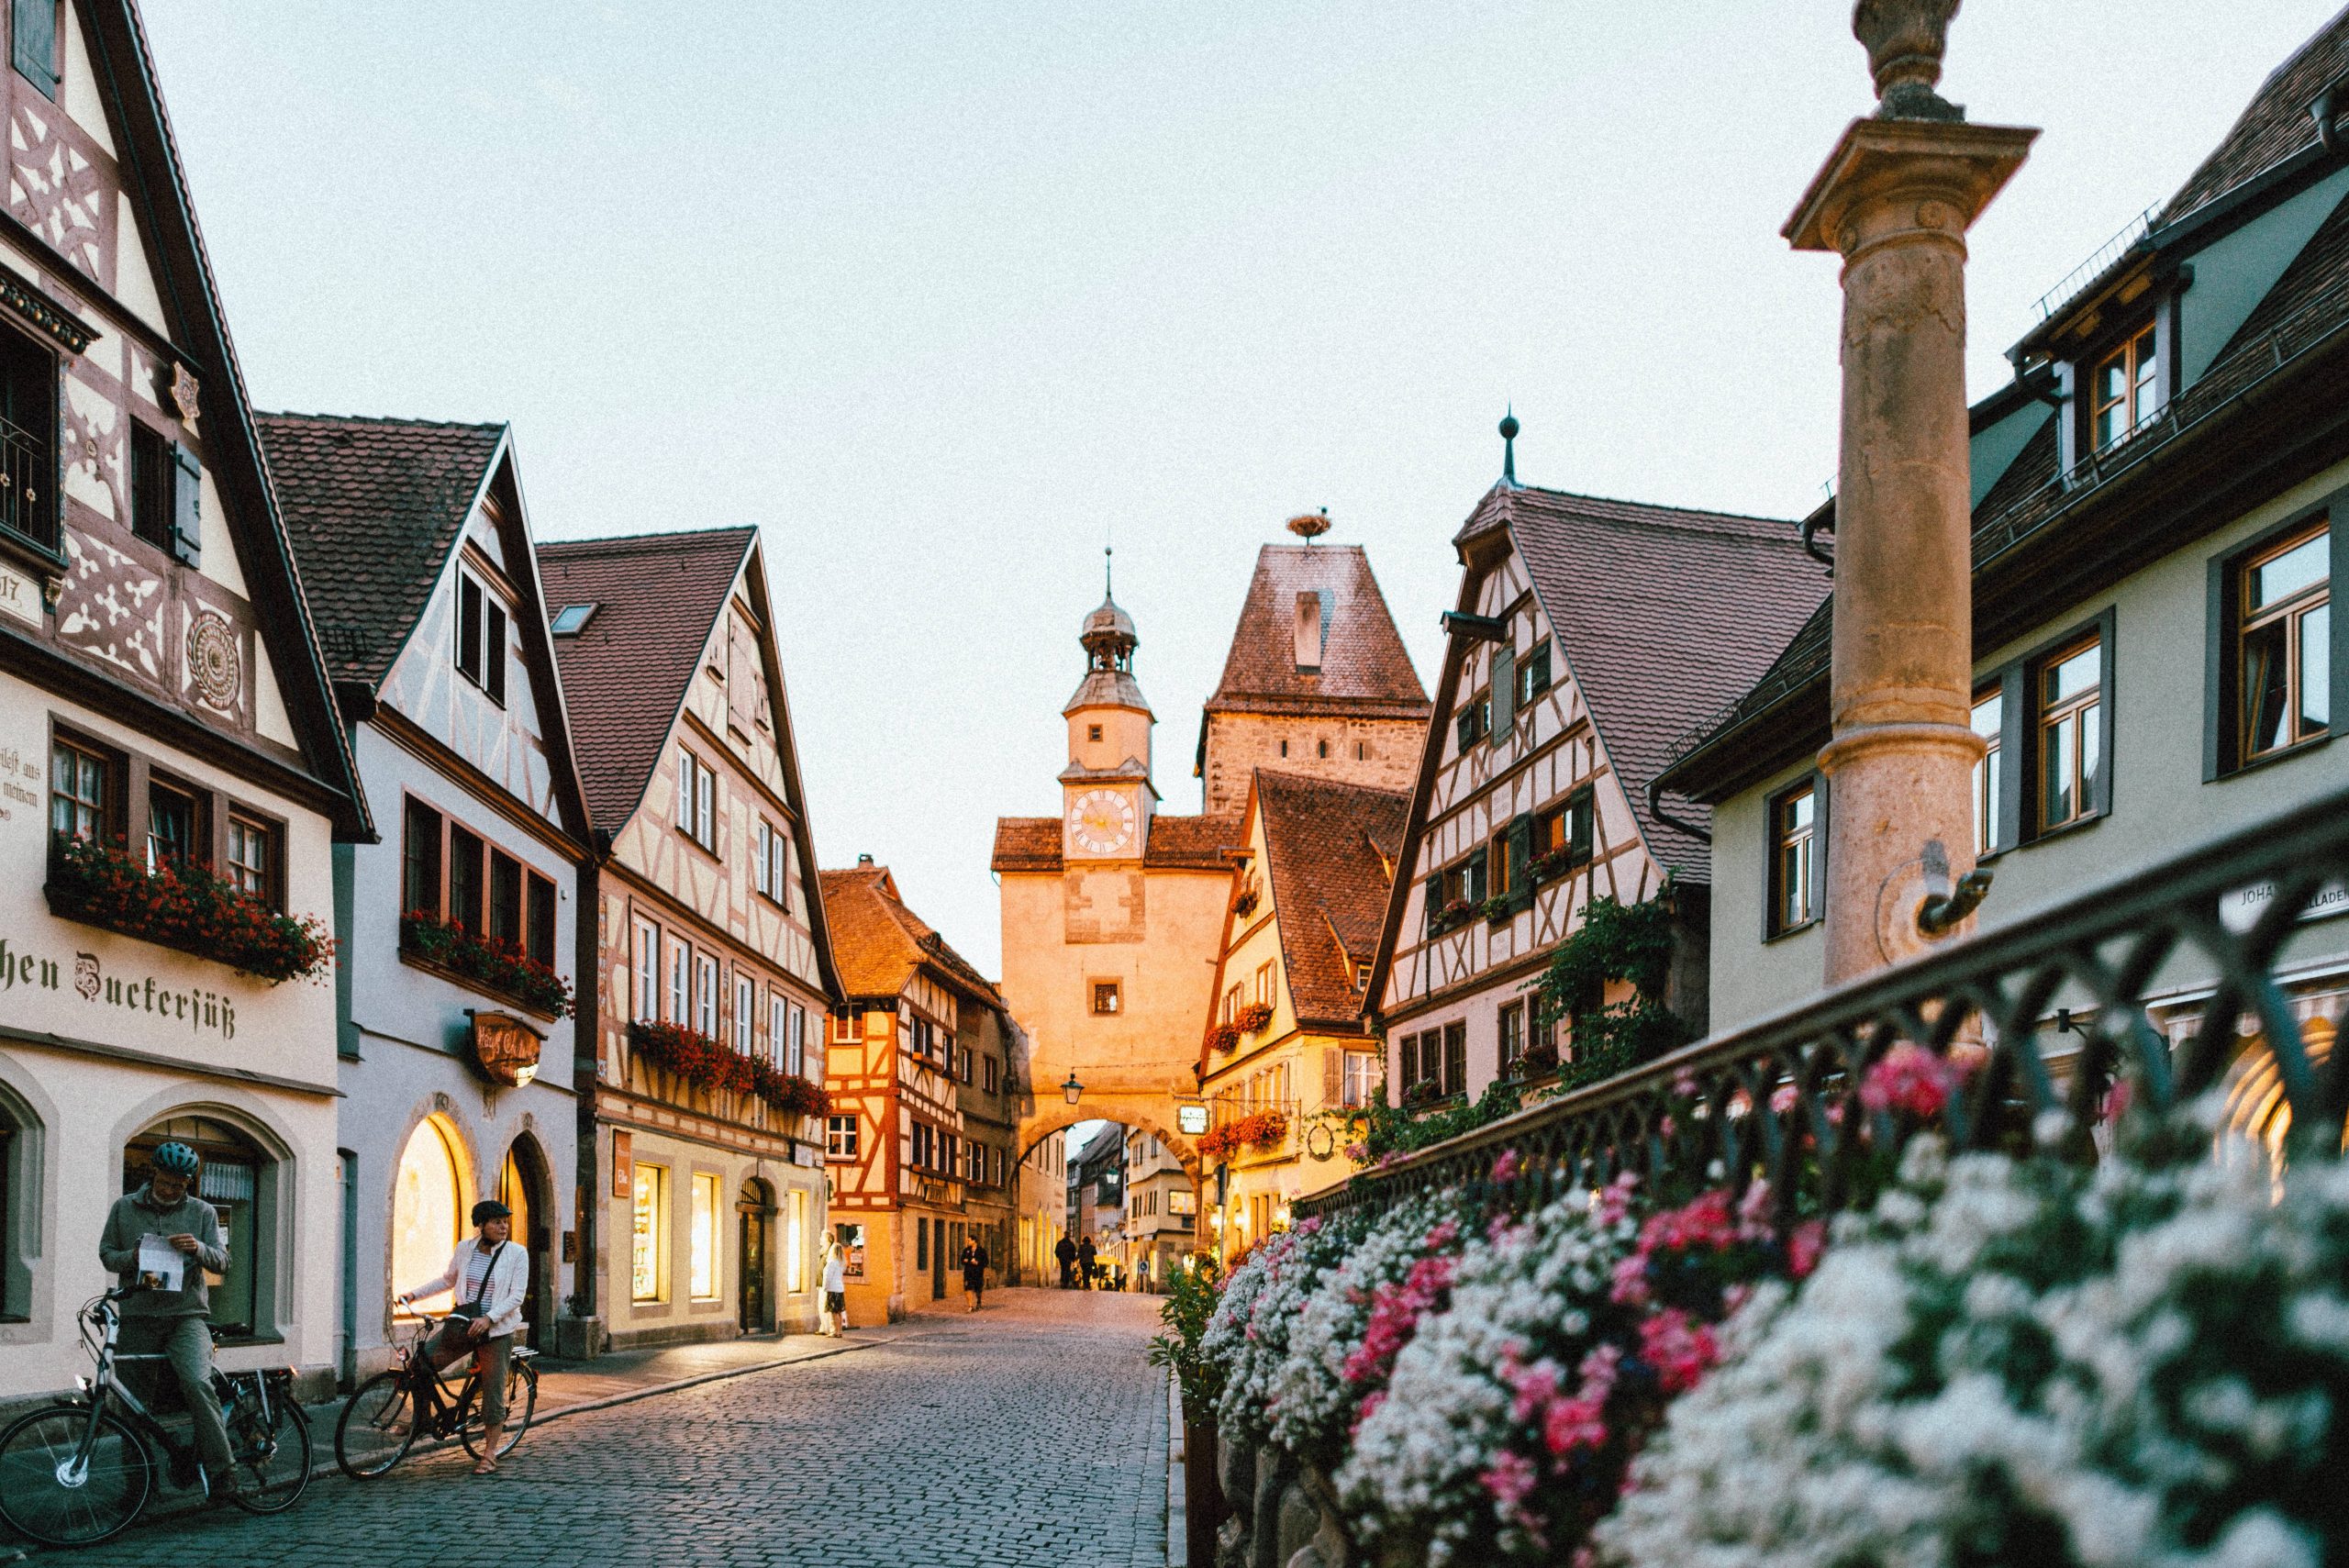 Flower lined streets in Rothenburg, Germany in Europe for ETIAS Guide